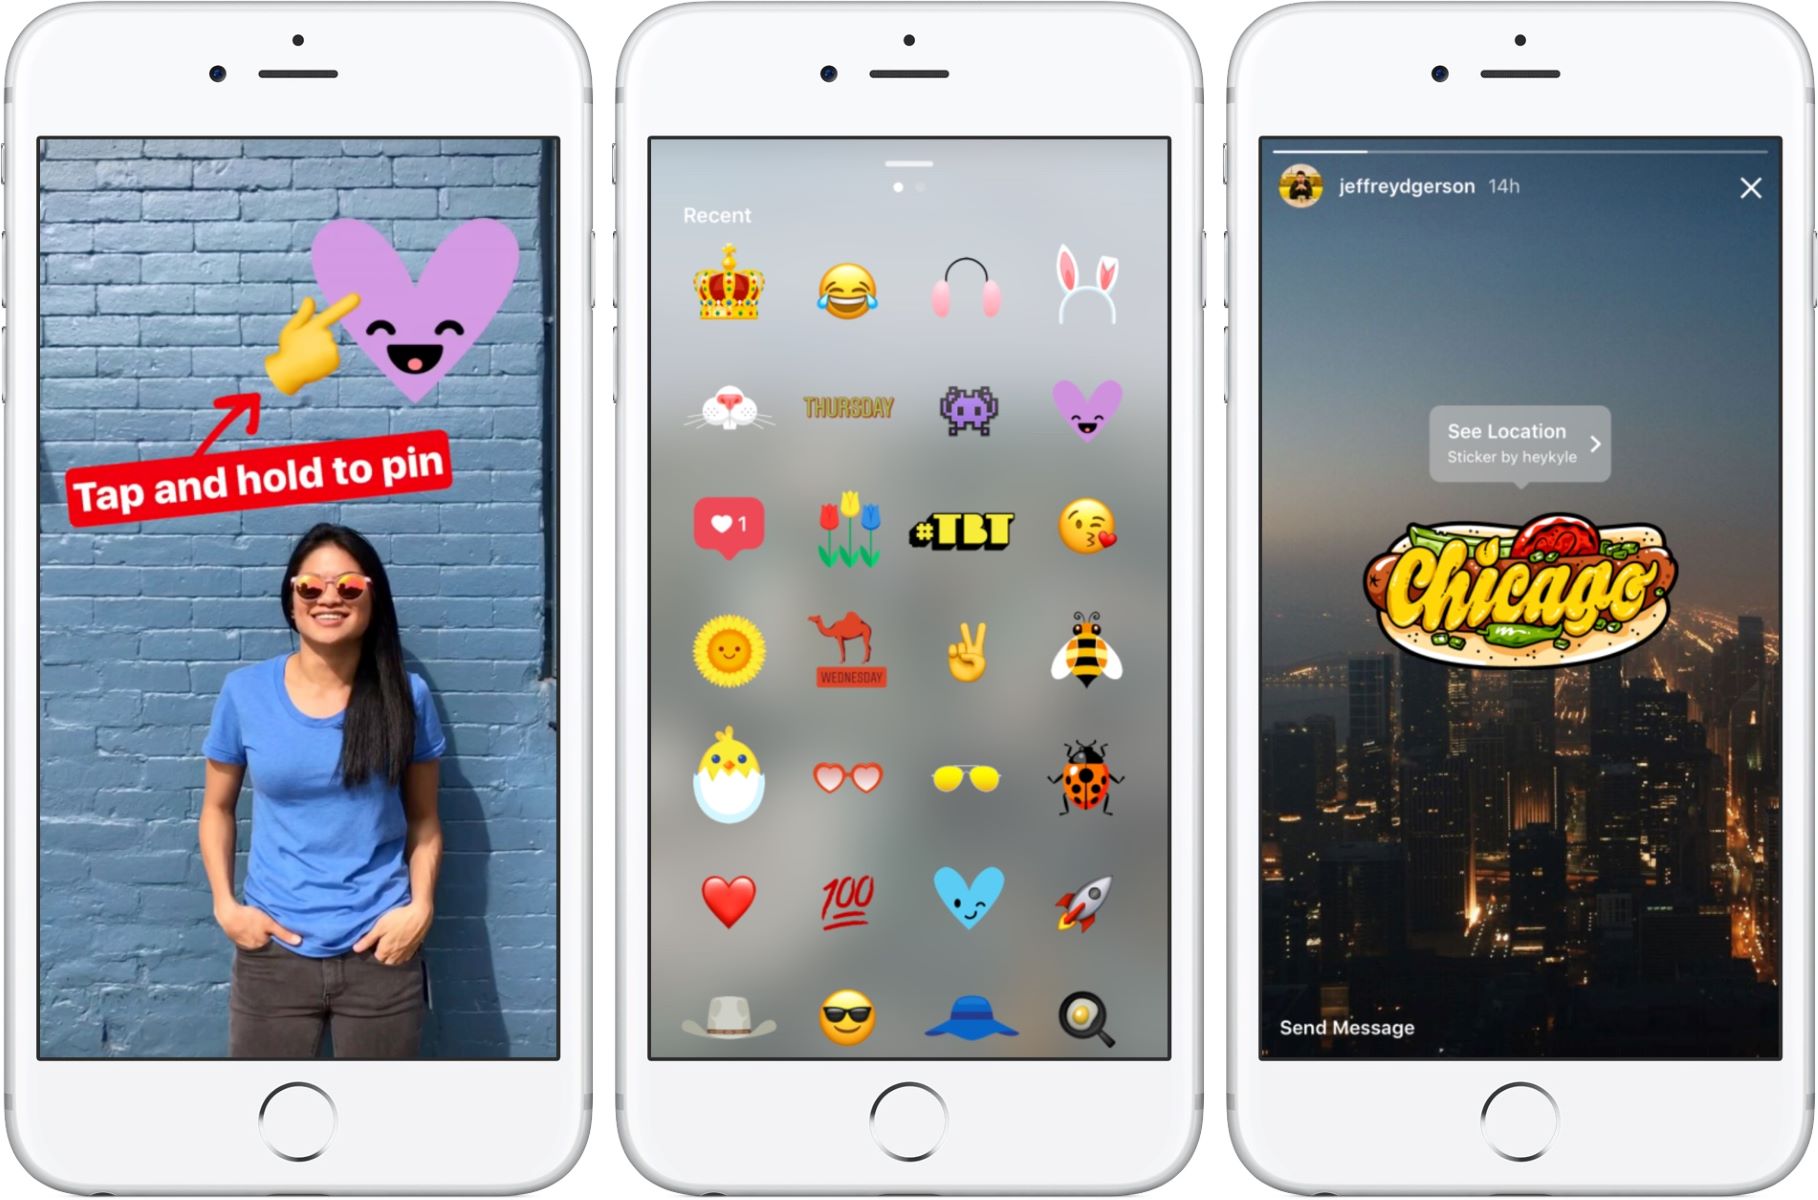 enhancing-photos-with-stickers-on-your-iphone-quick-guide